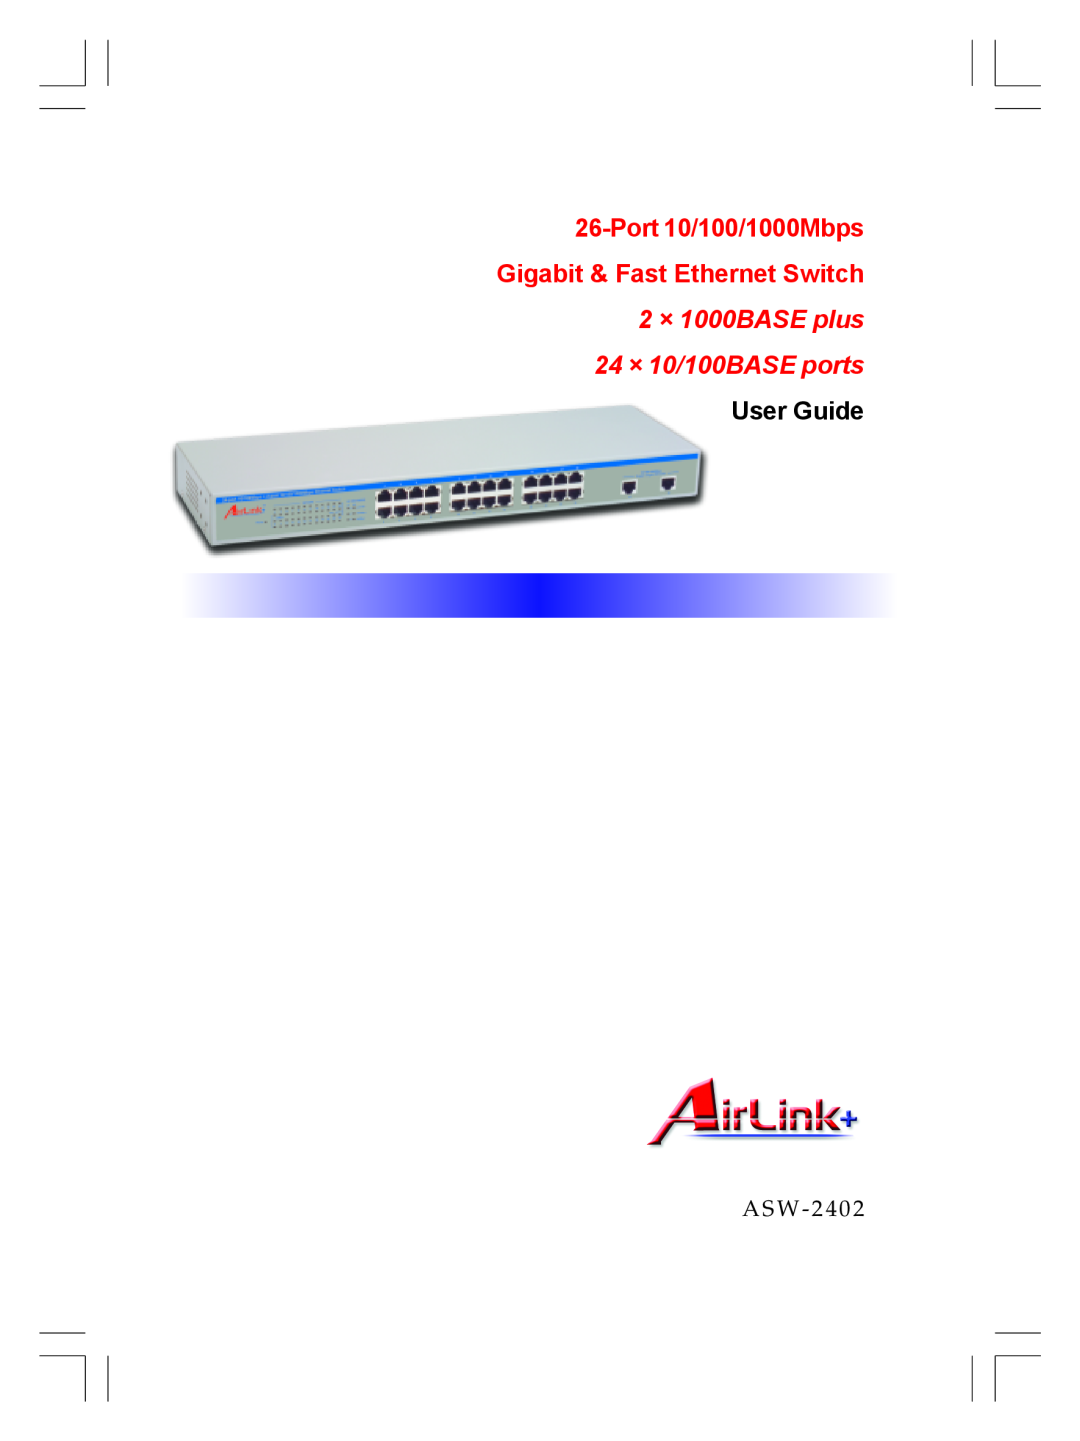 Airlink ASW-2402 manual port 10/100/1000Mbps Gigabit & Fast Ethernet Switch, AirLink+ 